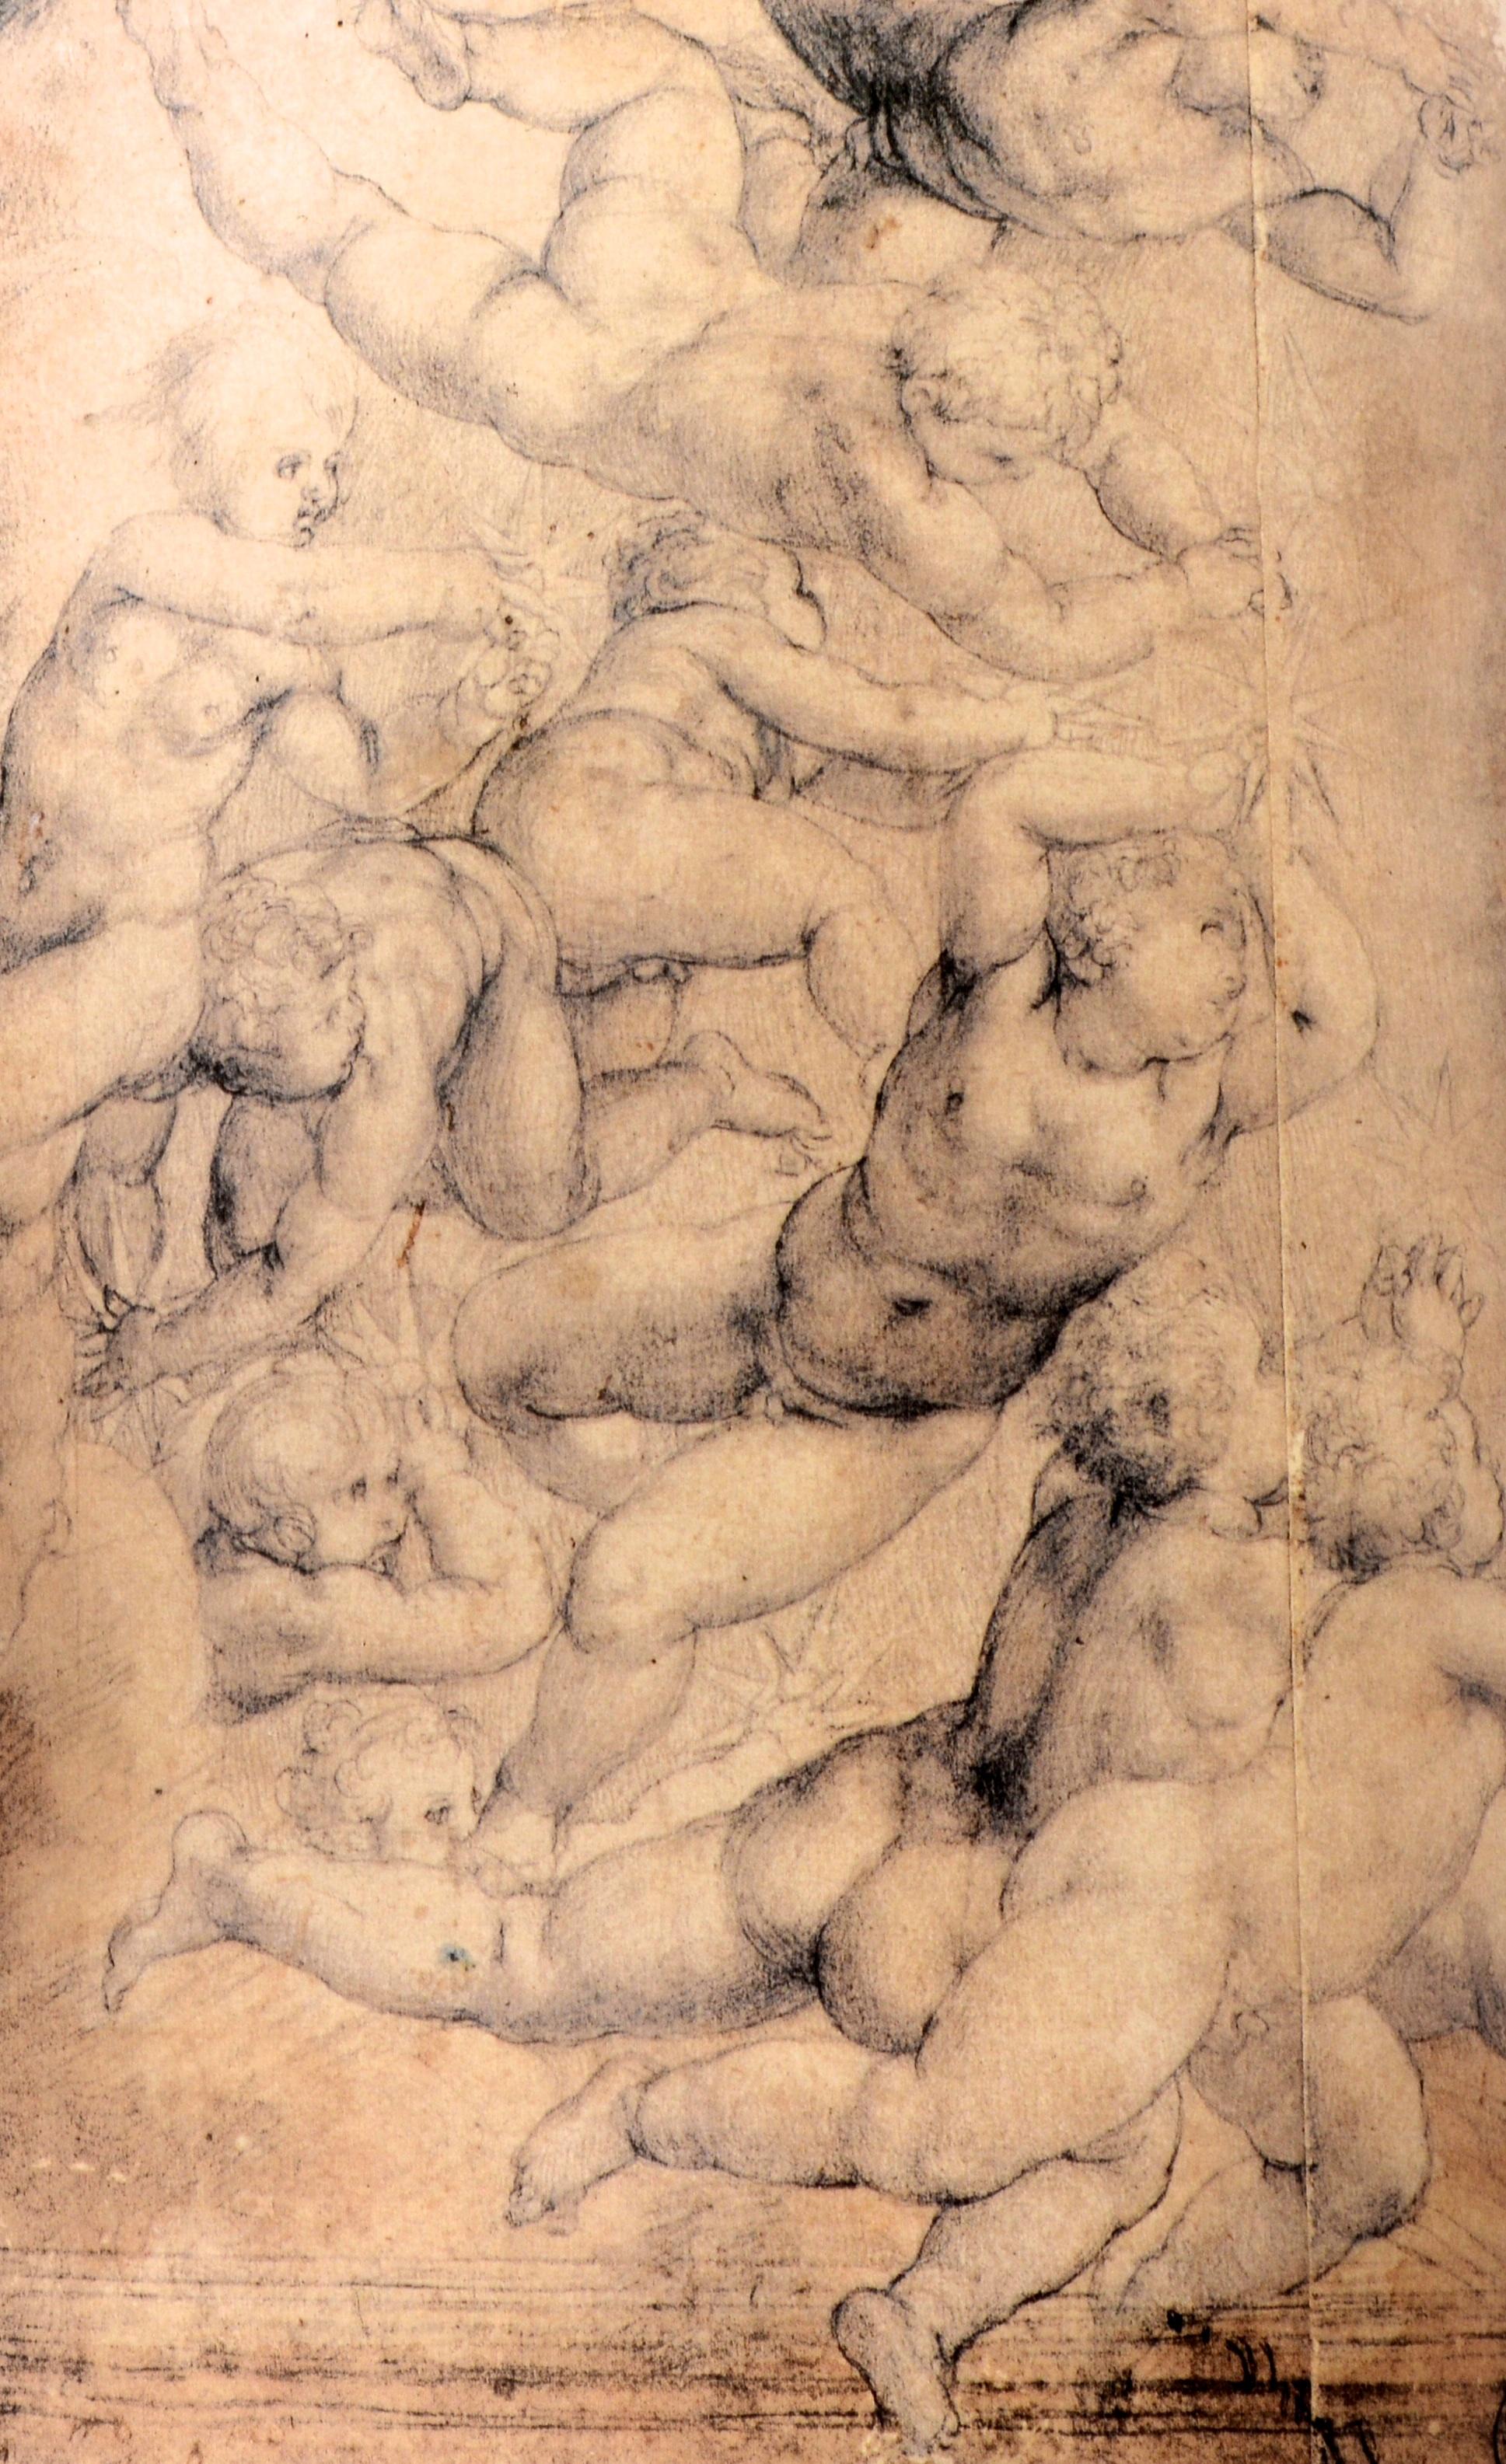 Michelangelo, Vasari, and Their Contemporaries: Drawings from the Uffizi, 1st Ed 13